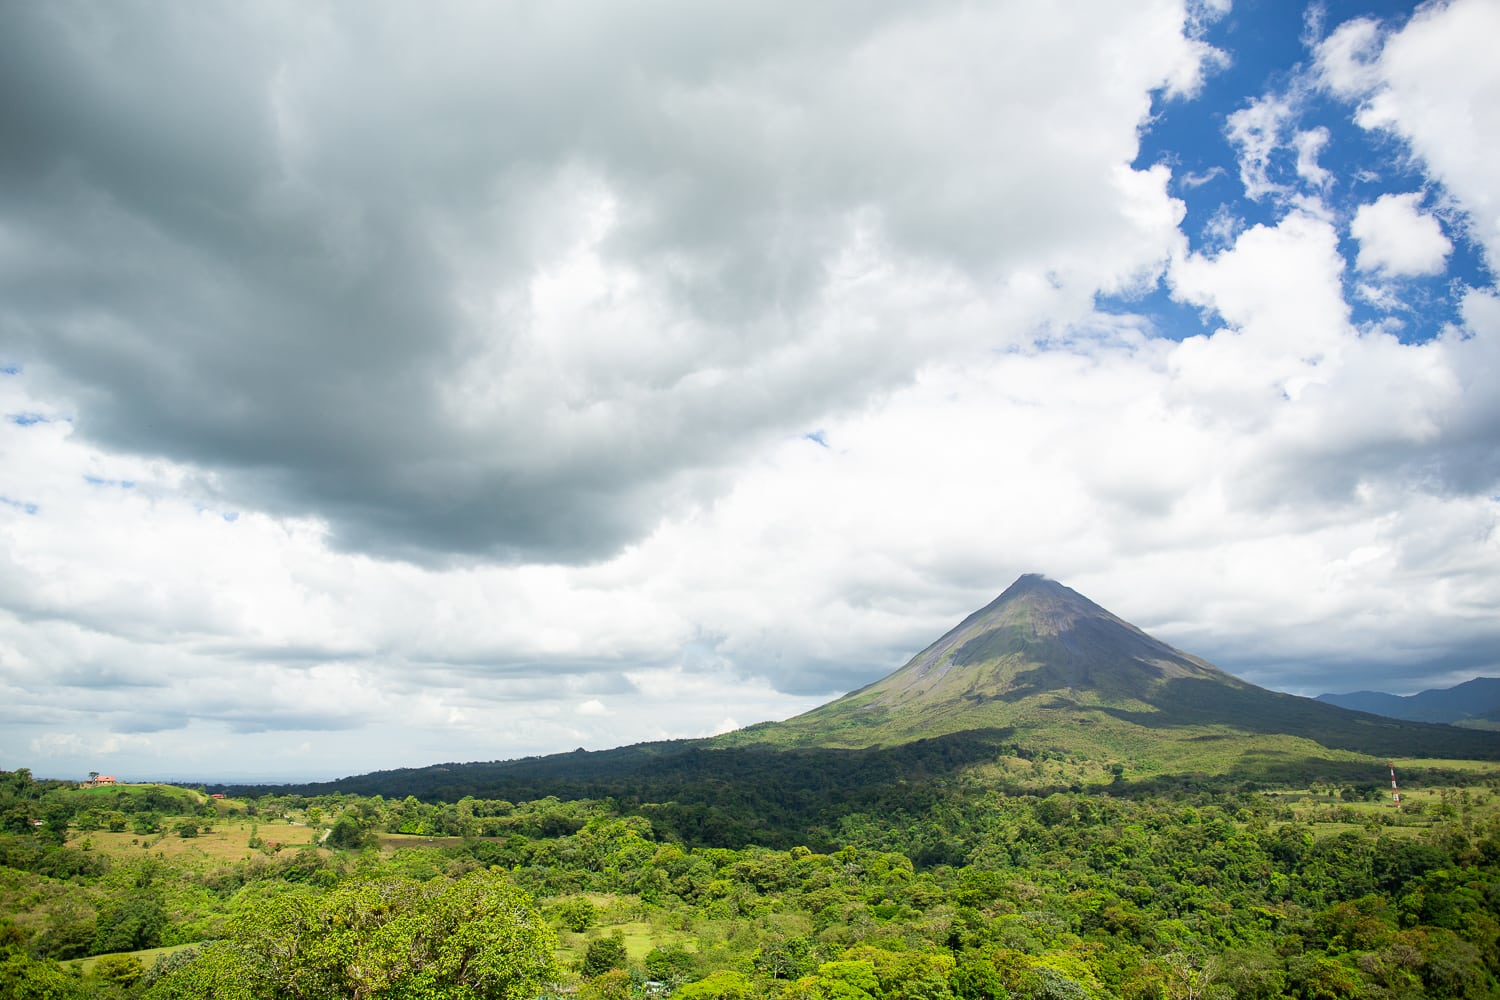 Arenal Volcano dominates the skyline of the tropical town of La Fortuna, Costa Rica.